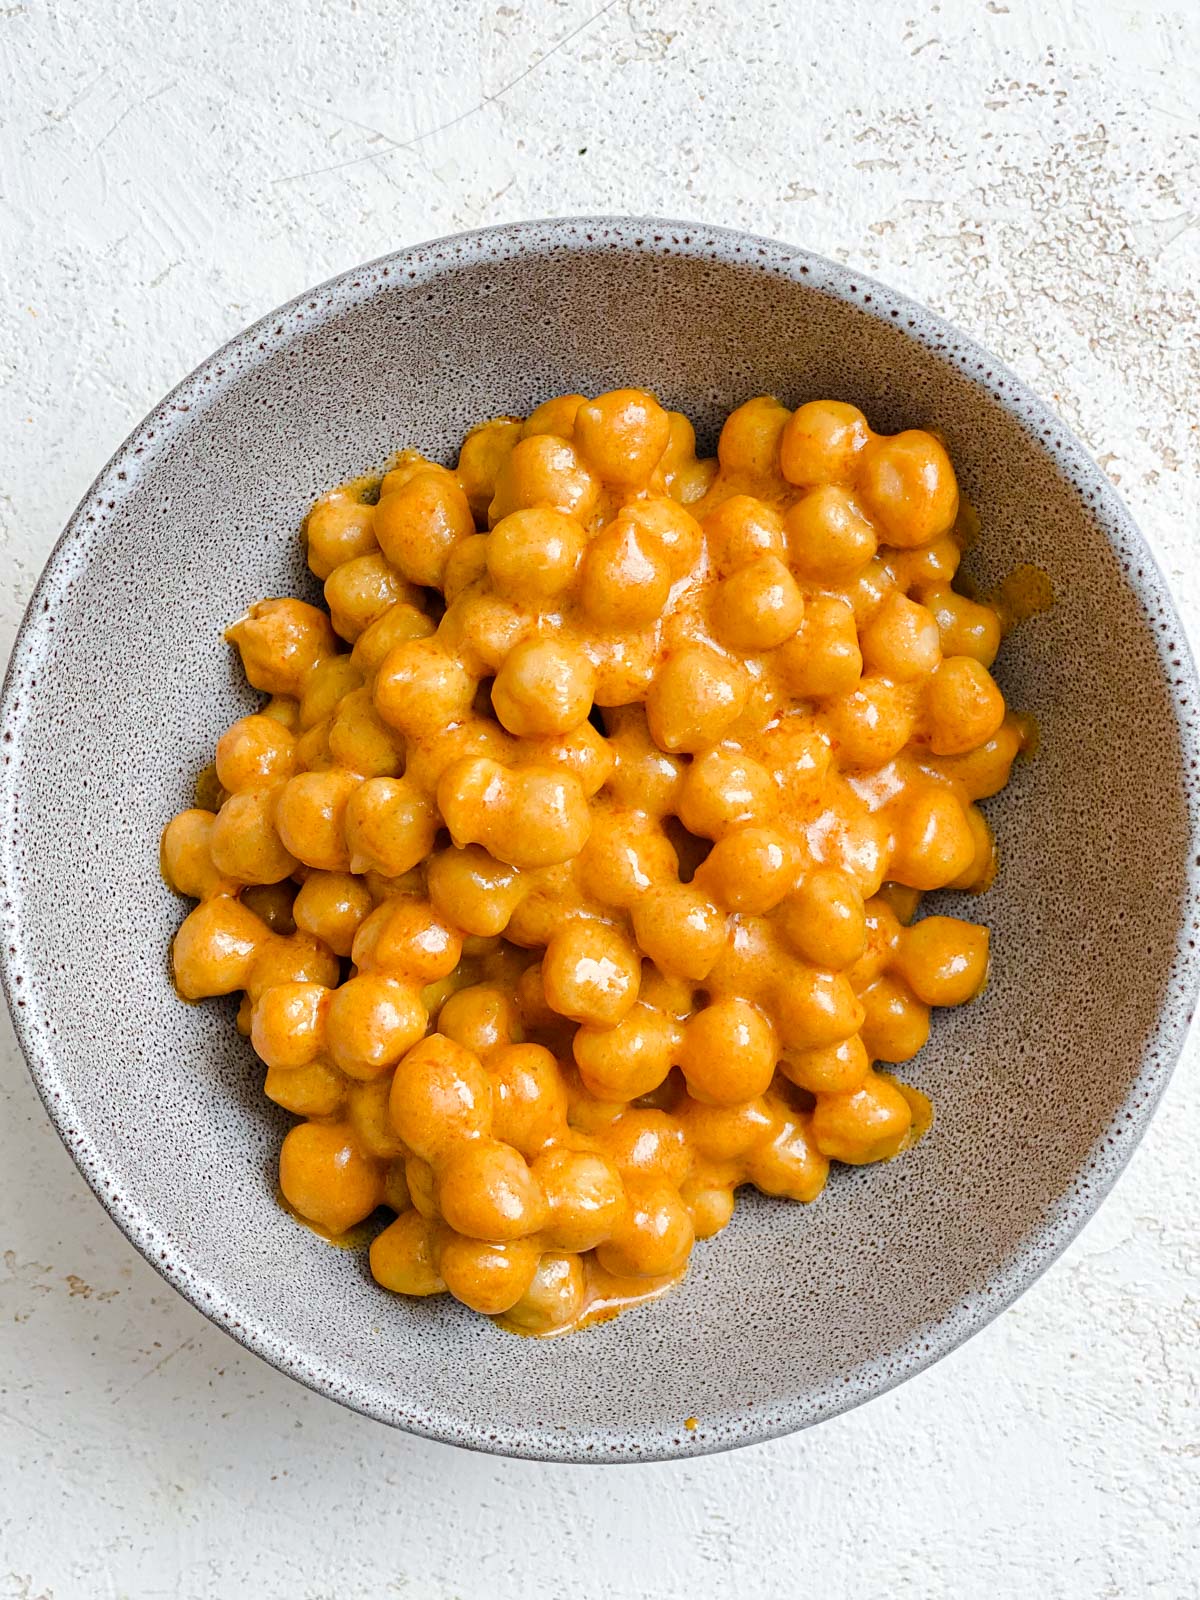 post mixing of chickpeas and buffalo sauce together in bowl